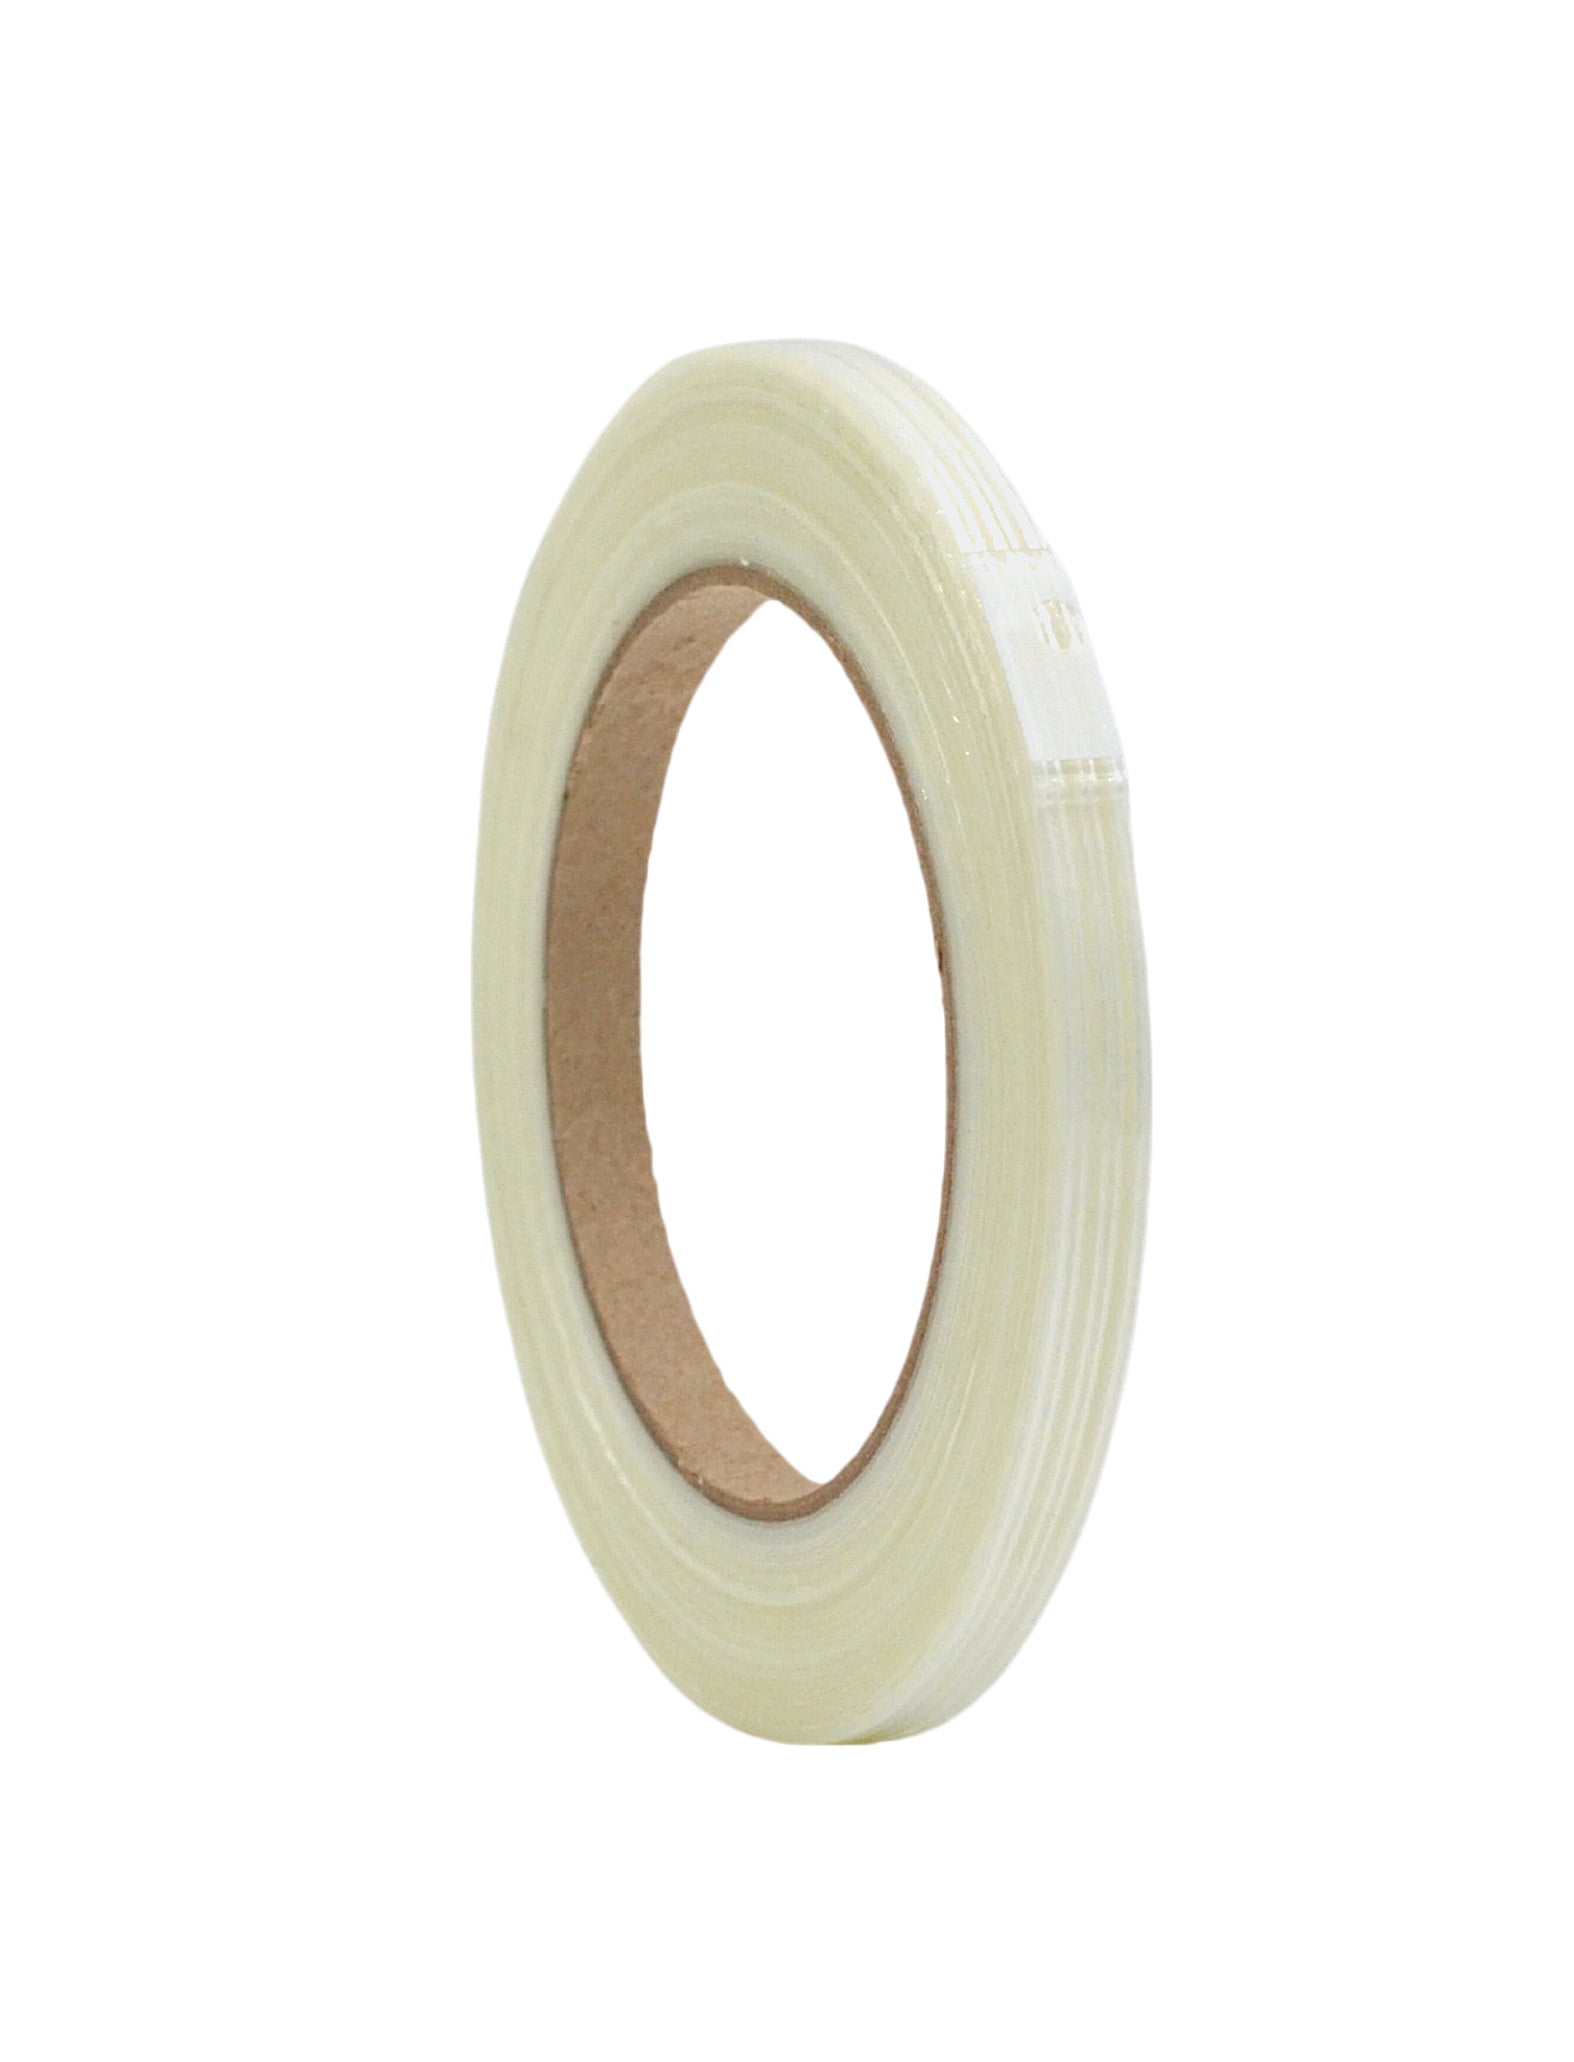 Intertape Polymer Group 1x60 Strapping Tape 9716 Unit Roll for sale online 